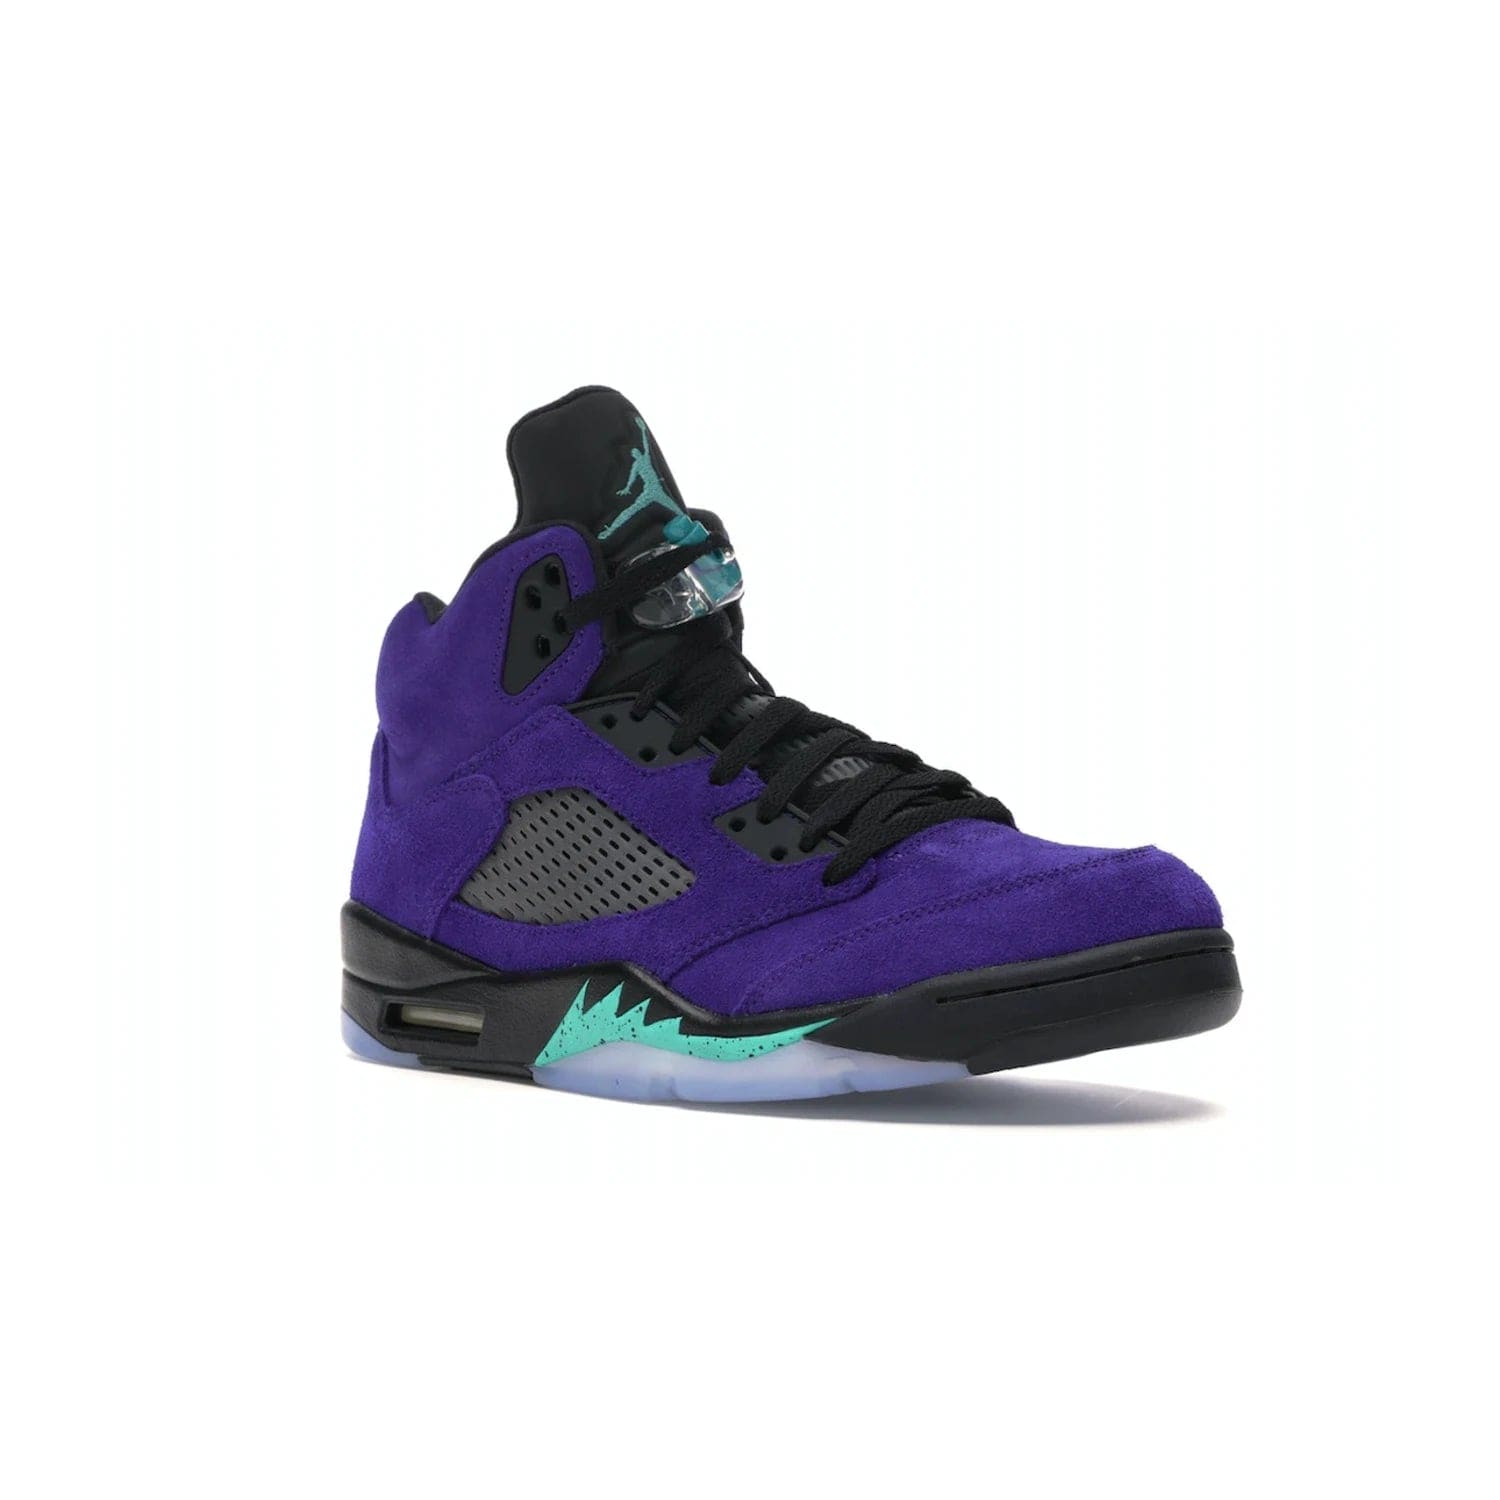 Jordan 5 Retro Alternate Grape - Image 5 - Only at www.BallersClubKickz.com - Bring the classic Jordan 5 Retro Alternate Grape to your sneaker collection! Featuring a purple suede upper, charcoal underlays, green detailing, and an icy and green outsole. Releasing for the first time since 1990, don't miss this chance to add a piece of sneaker history to your collection.